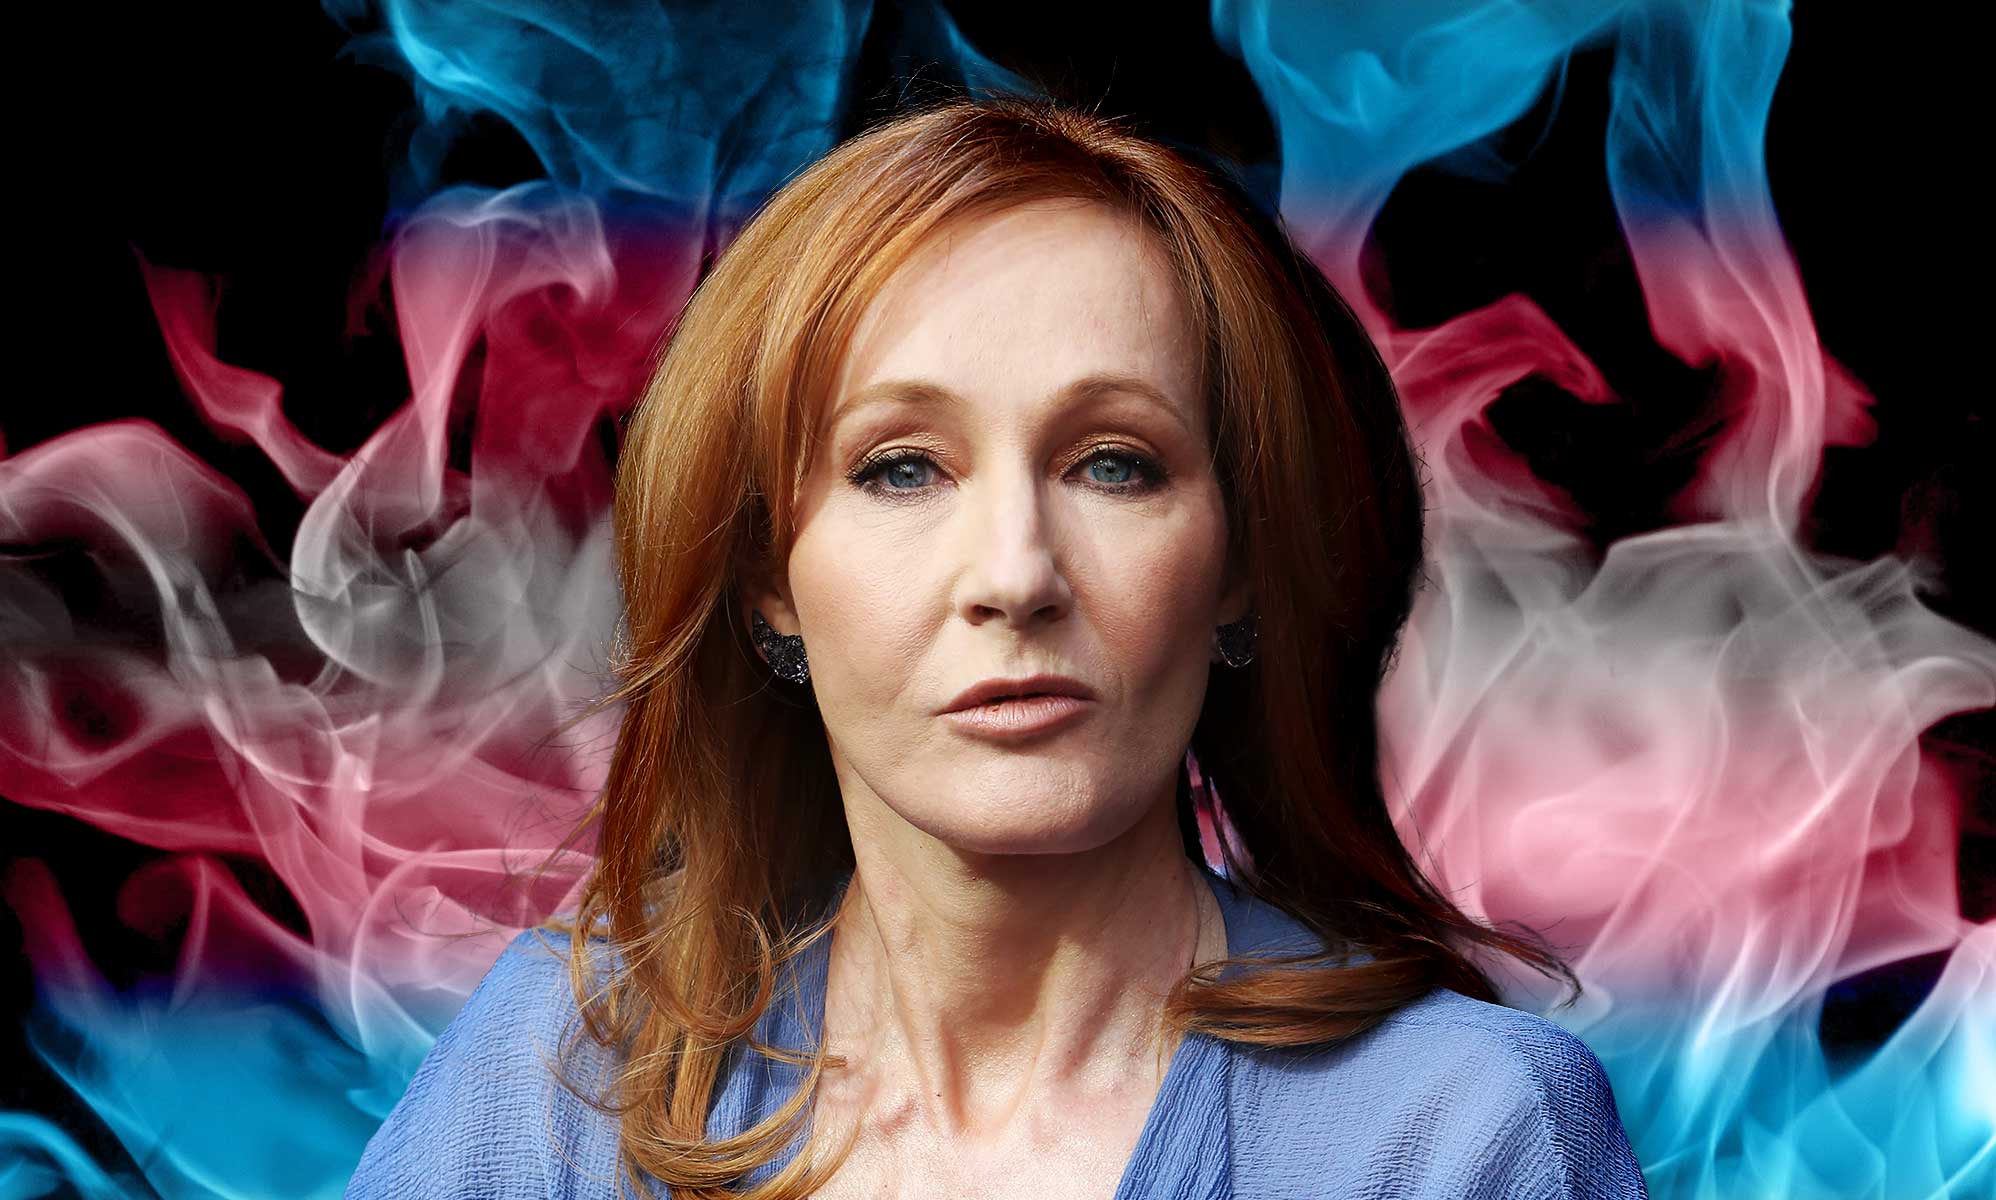 It's been 10 years since J.K. Rowling finished writing Deathly